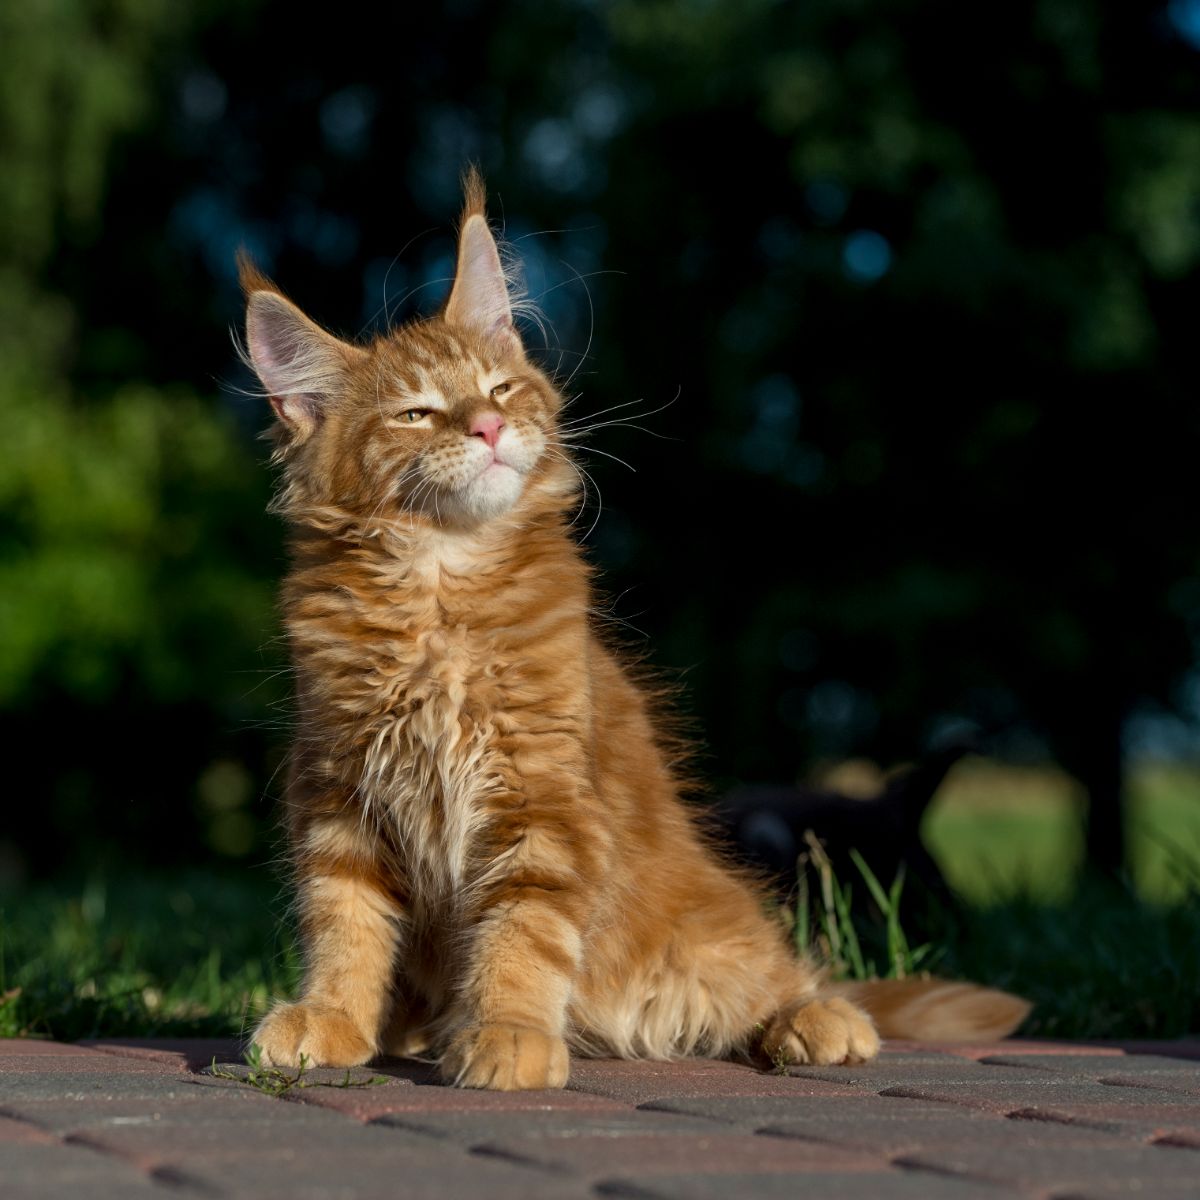 A cute ginger maine coon kitten sitting on a pavement on a sunny day.